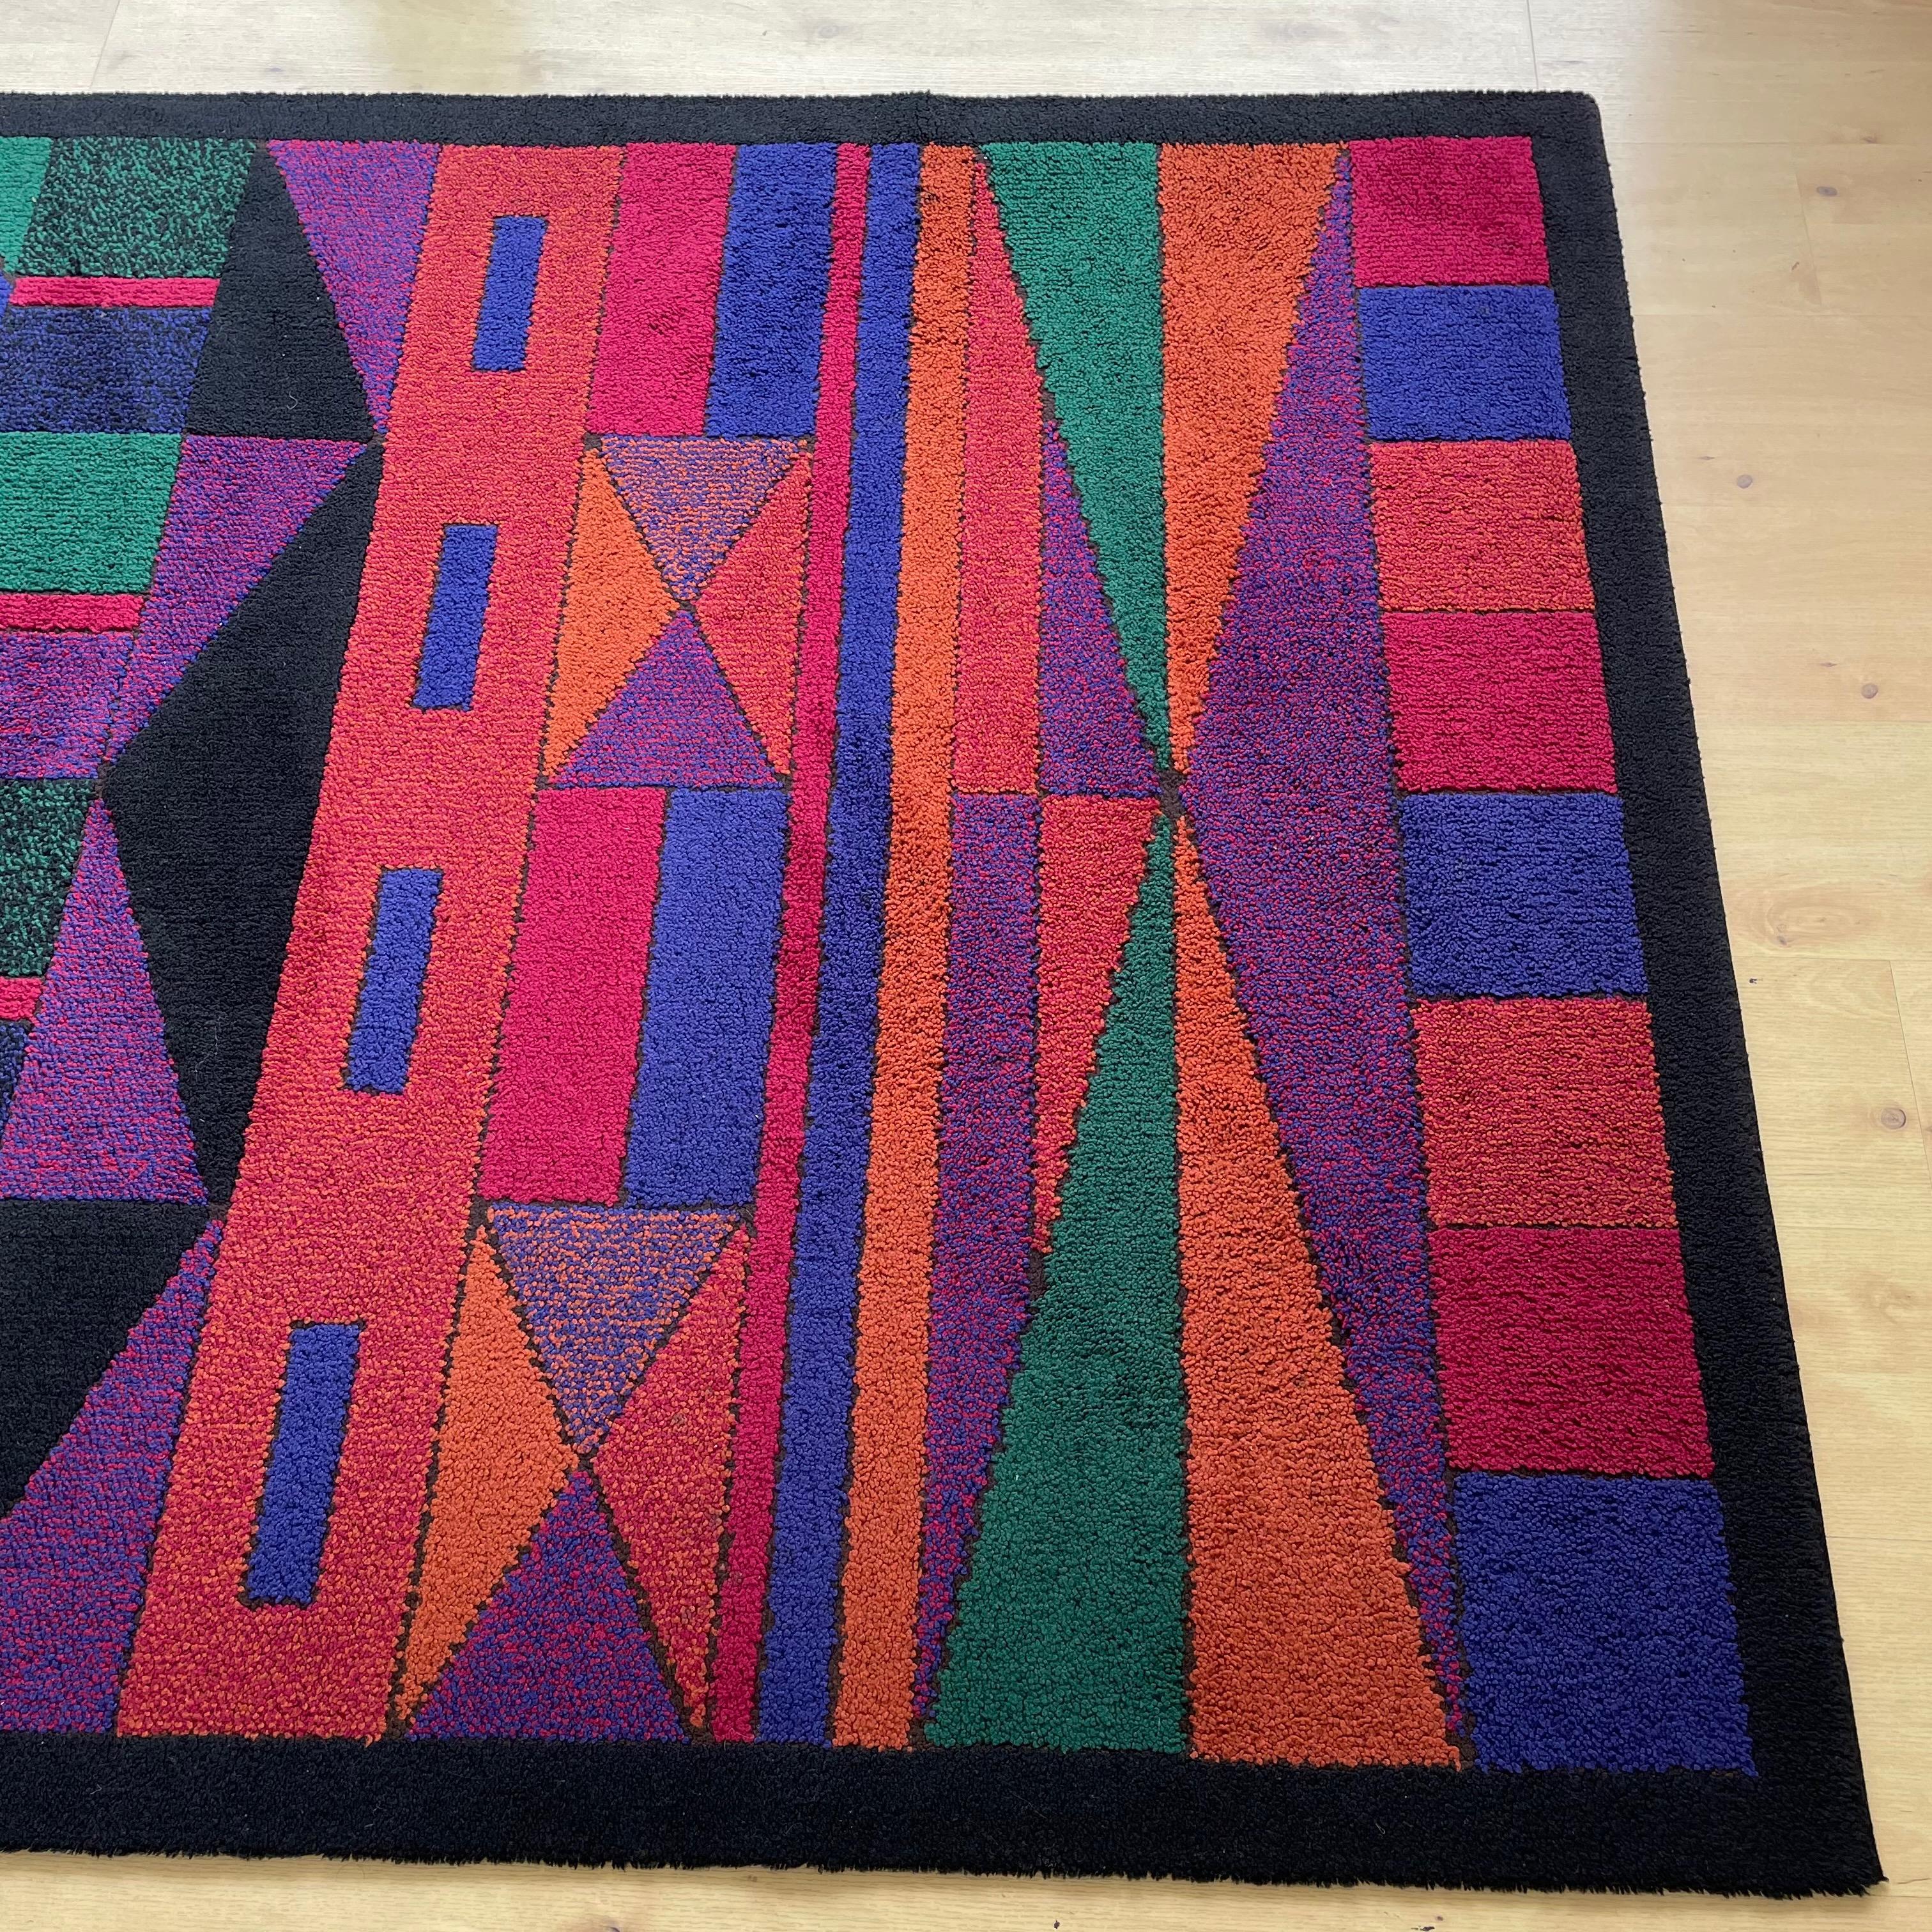 Psychedelic Memphis Style abstract Rug Carpet by Atrium Tefzet, Germany 1980s For Sale 5